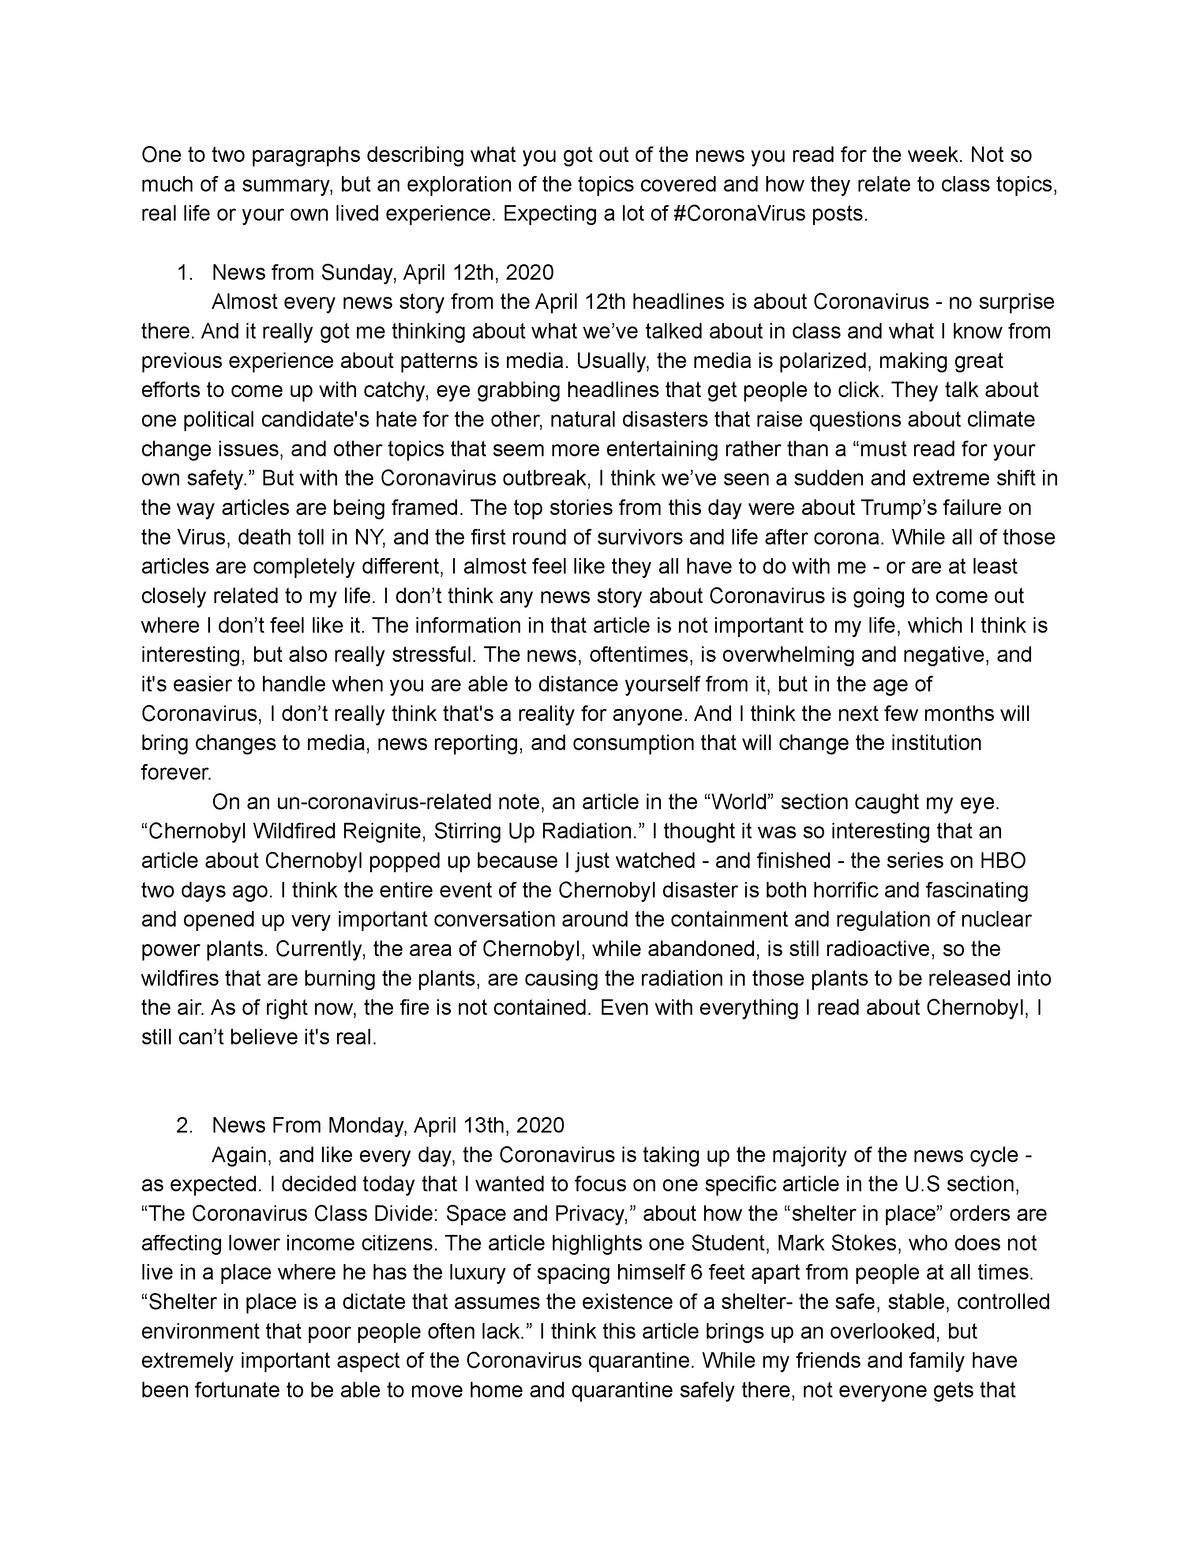 COMM 340 - News assignment - One to two paragraphs describing what you ...